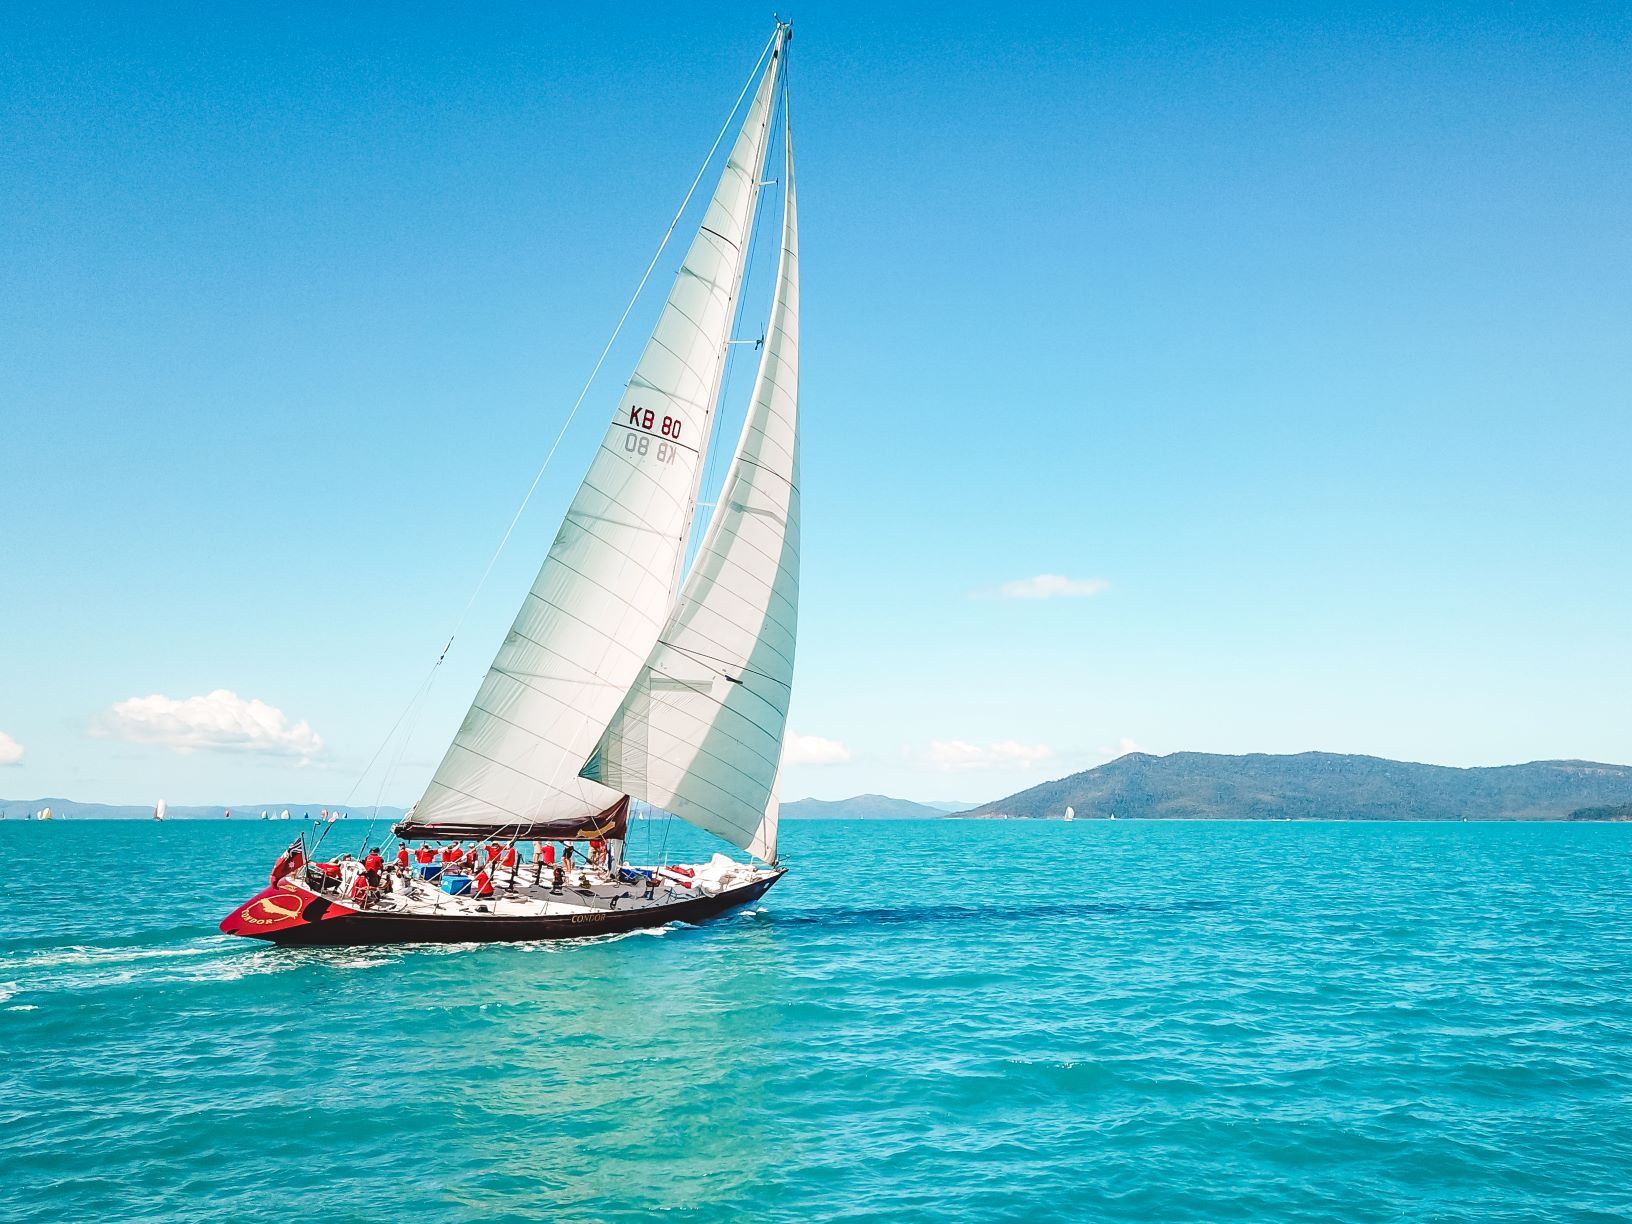 Four Day & Three Night Whitsunday Islands & Outer Reef Sailing Adventure on Condor